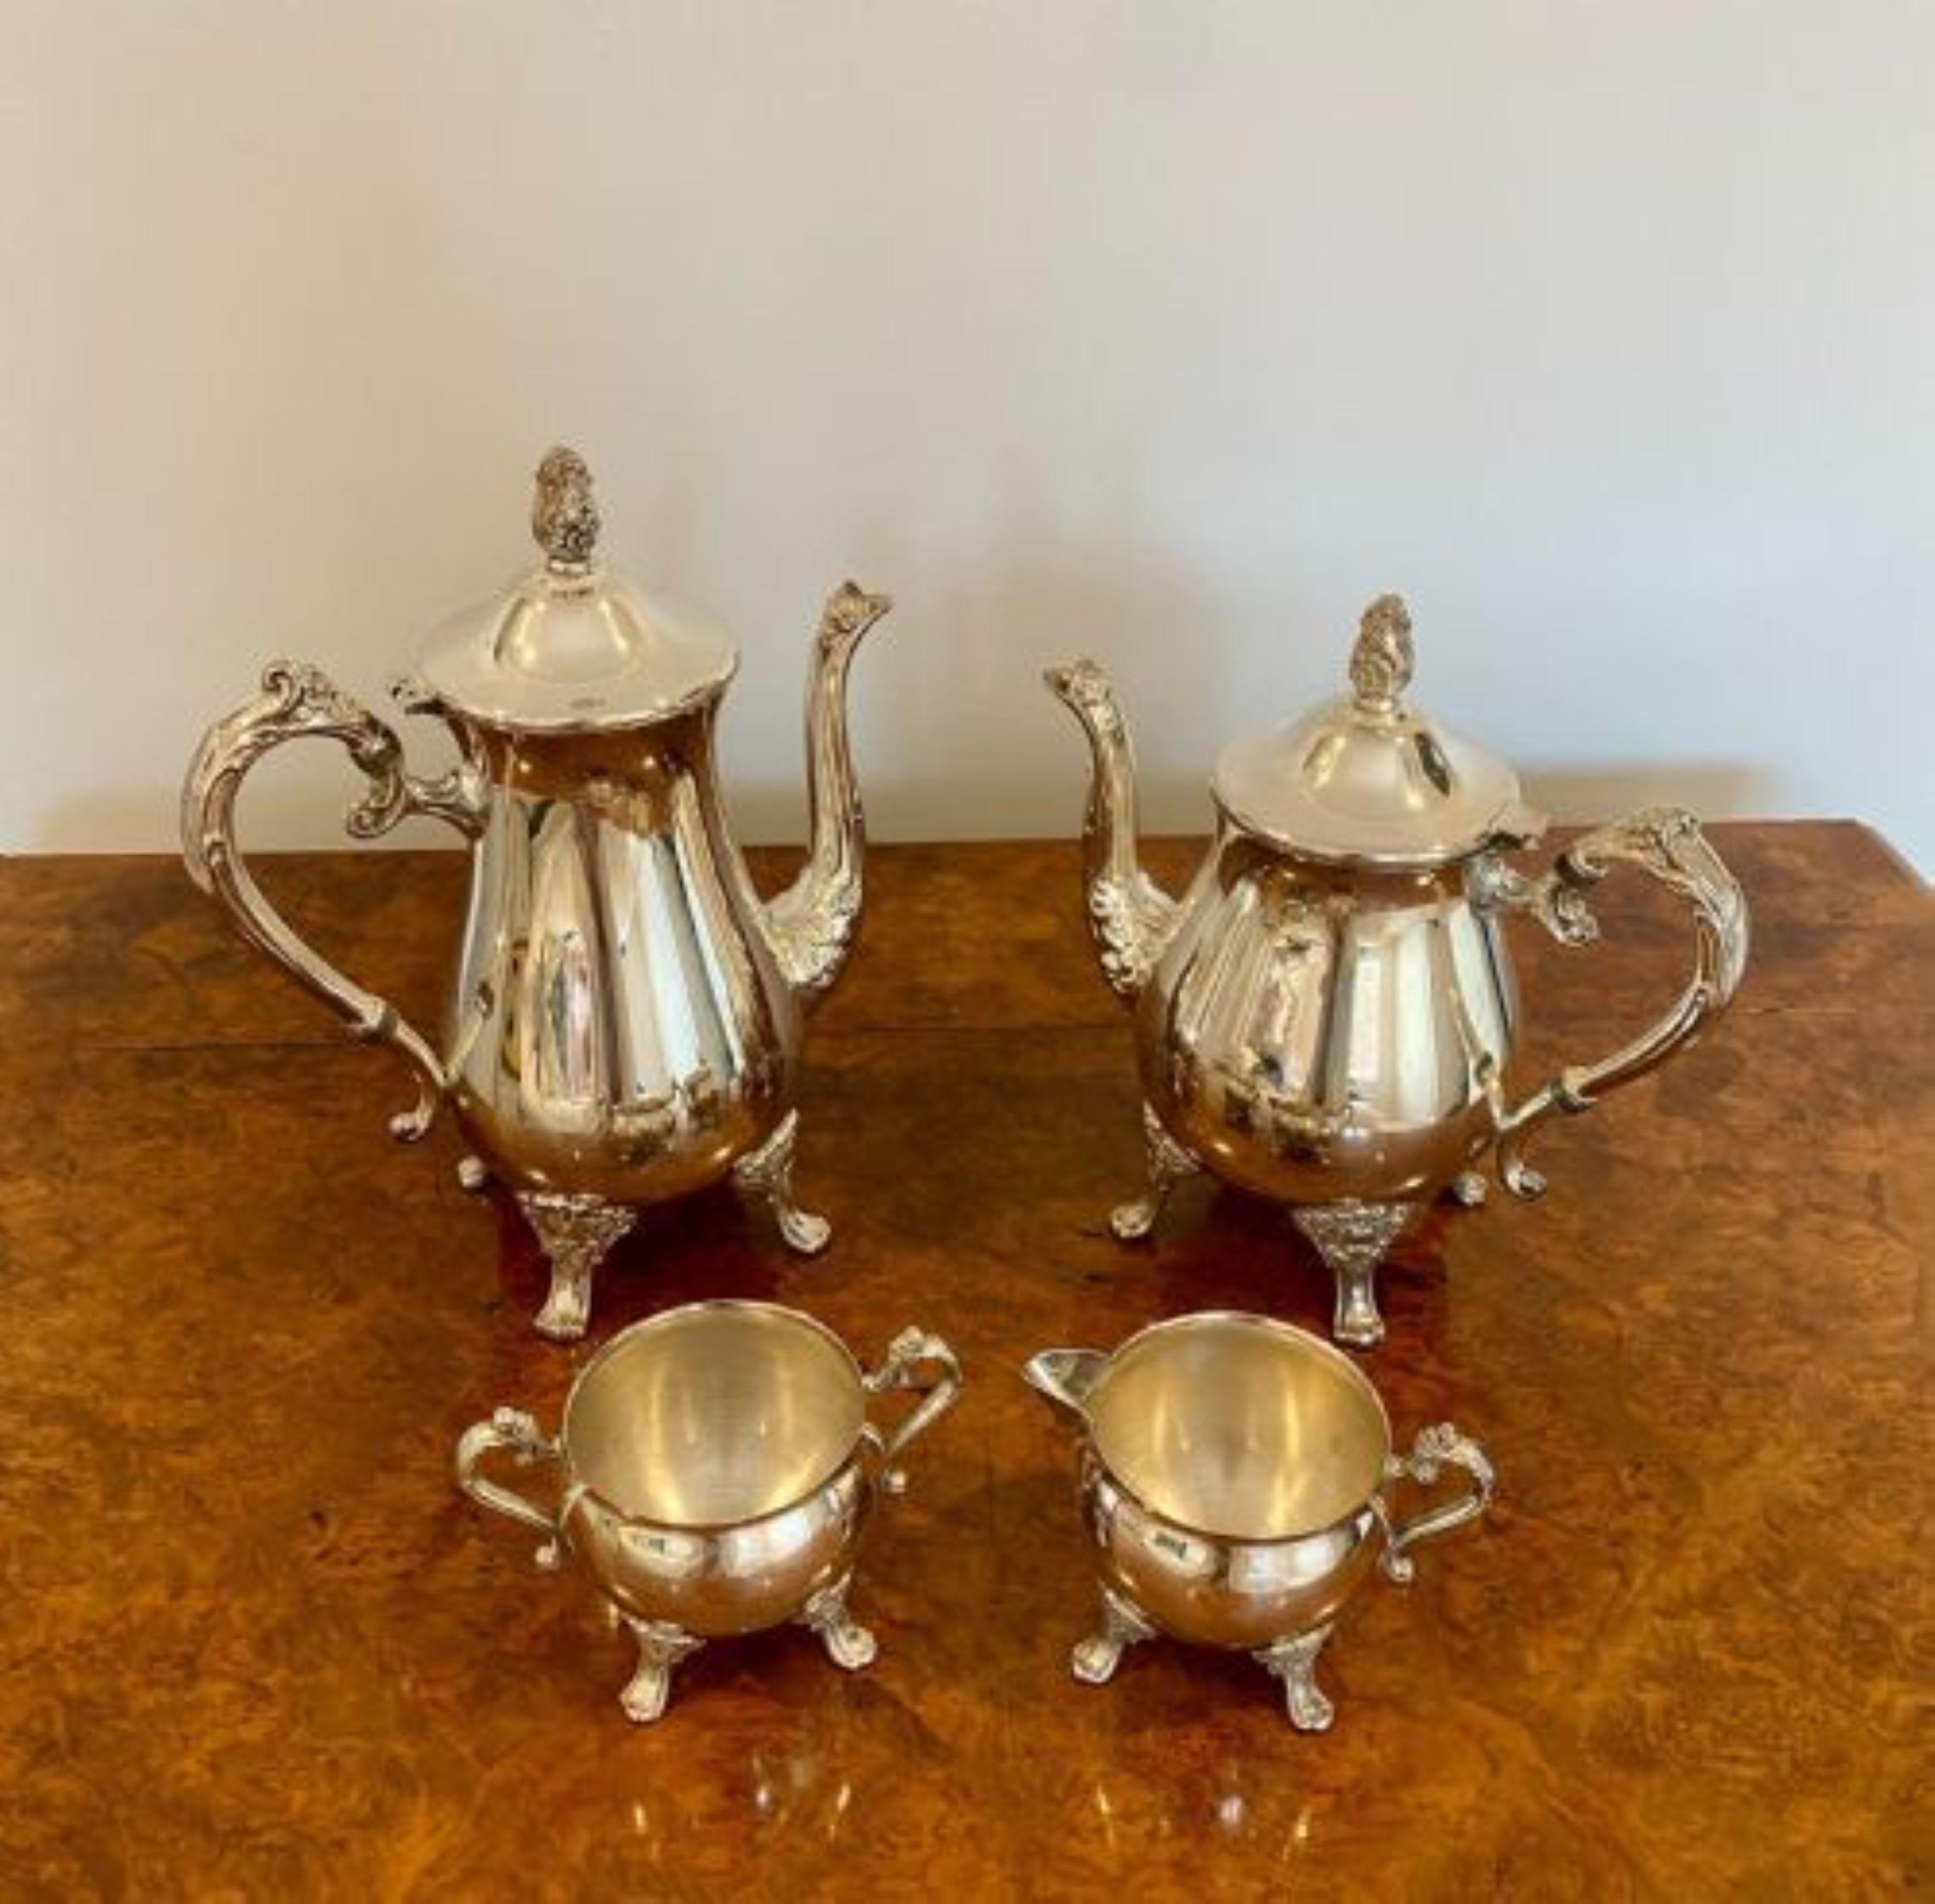 Antique Edwardian quality silver plated four piece tea set, Quality antique four piece silver plated tea set consisting of a tea and coffee pot, sugar bowl and a milk jug with ornate decoration raised on shaped ornate feet.